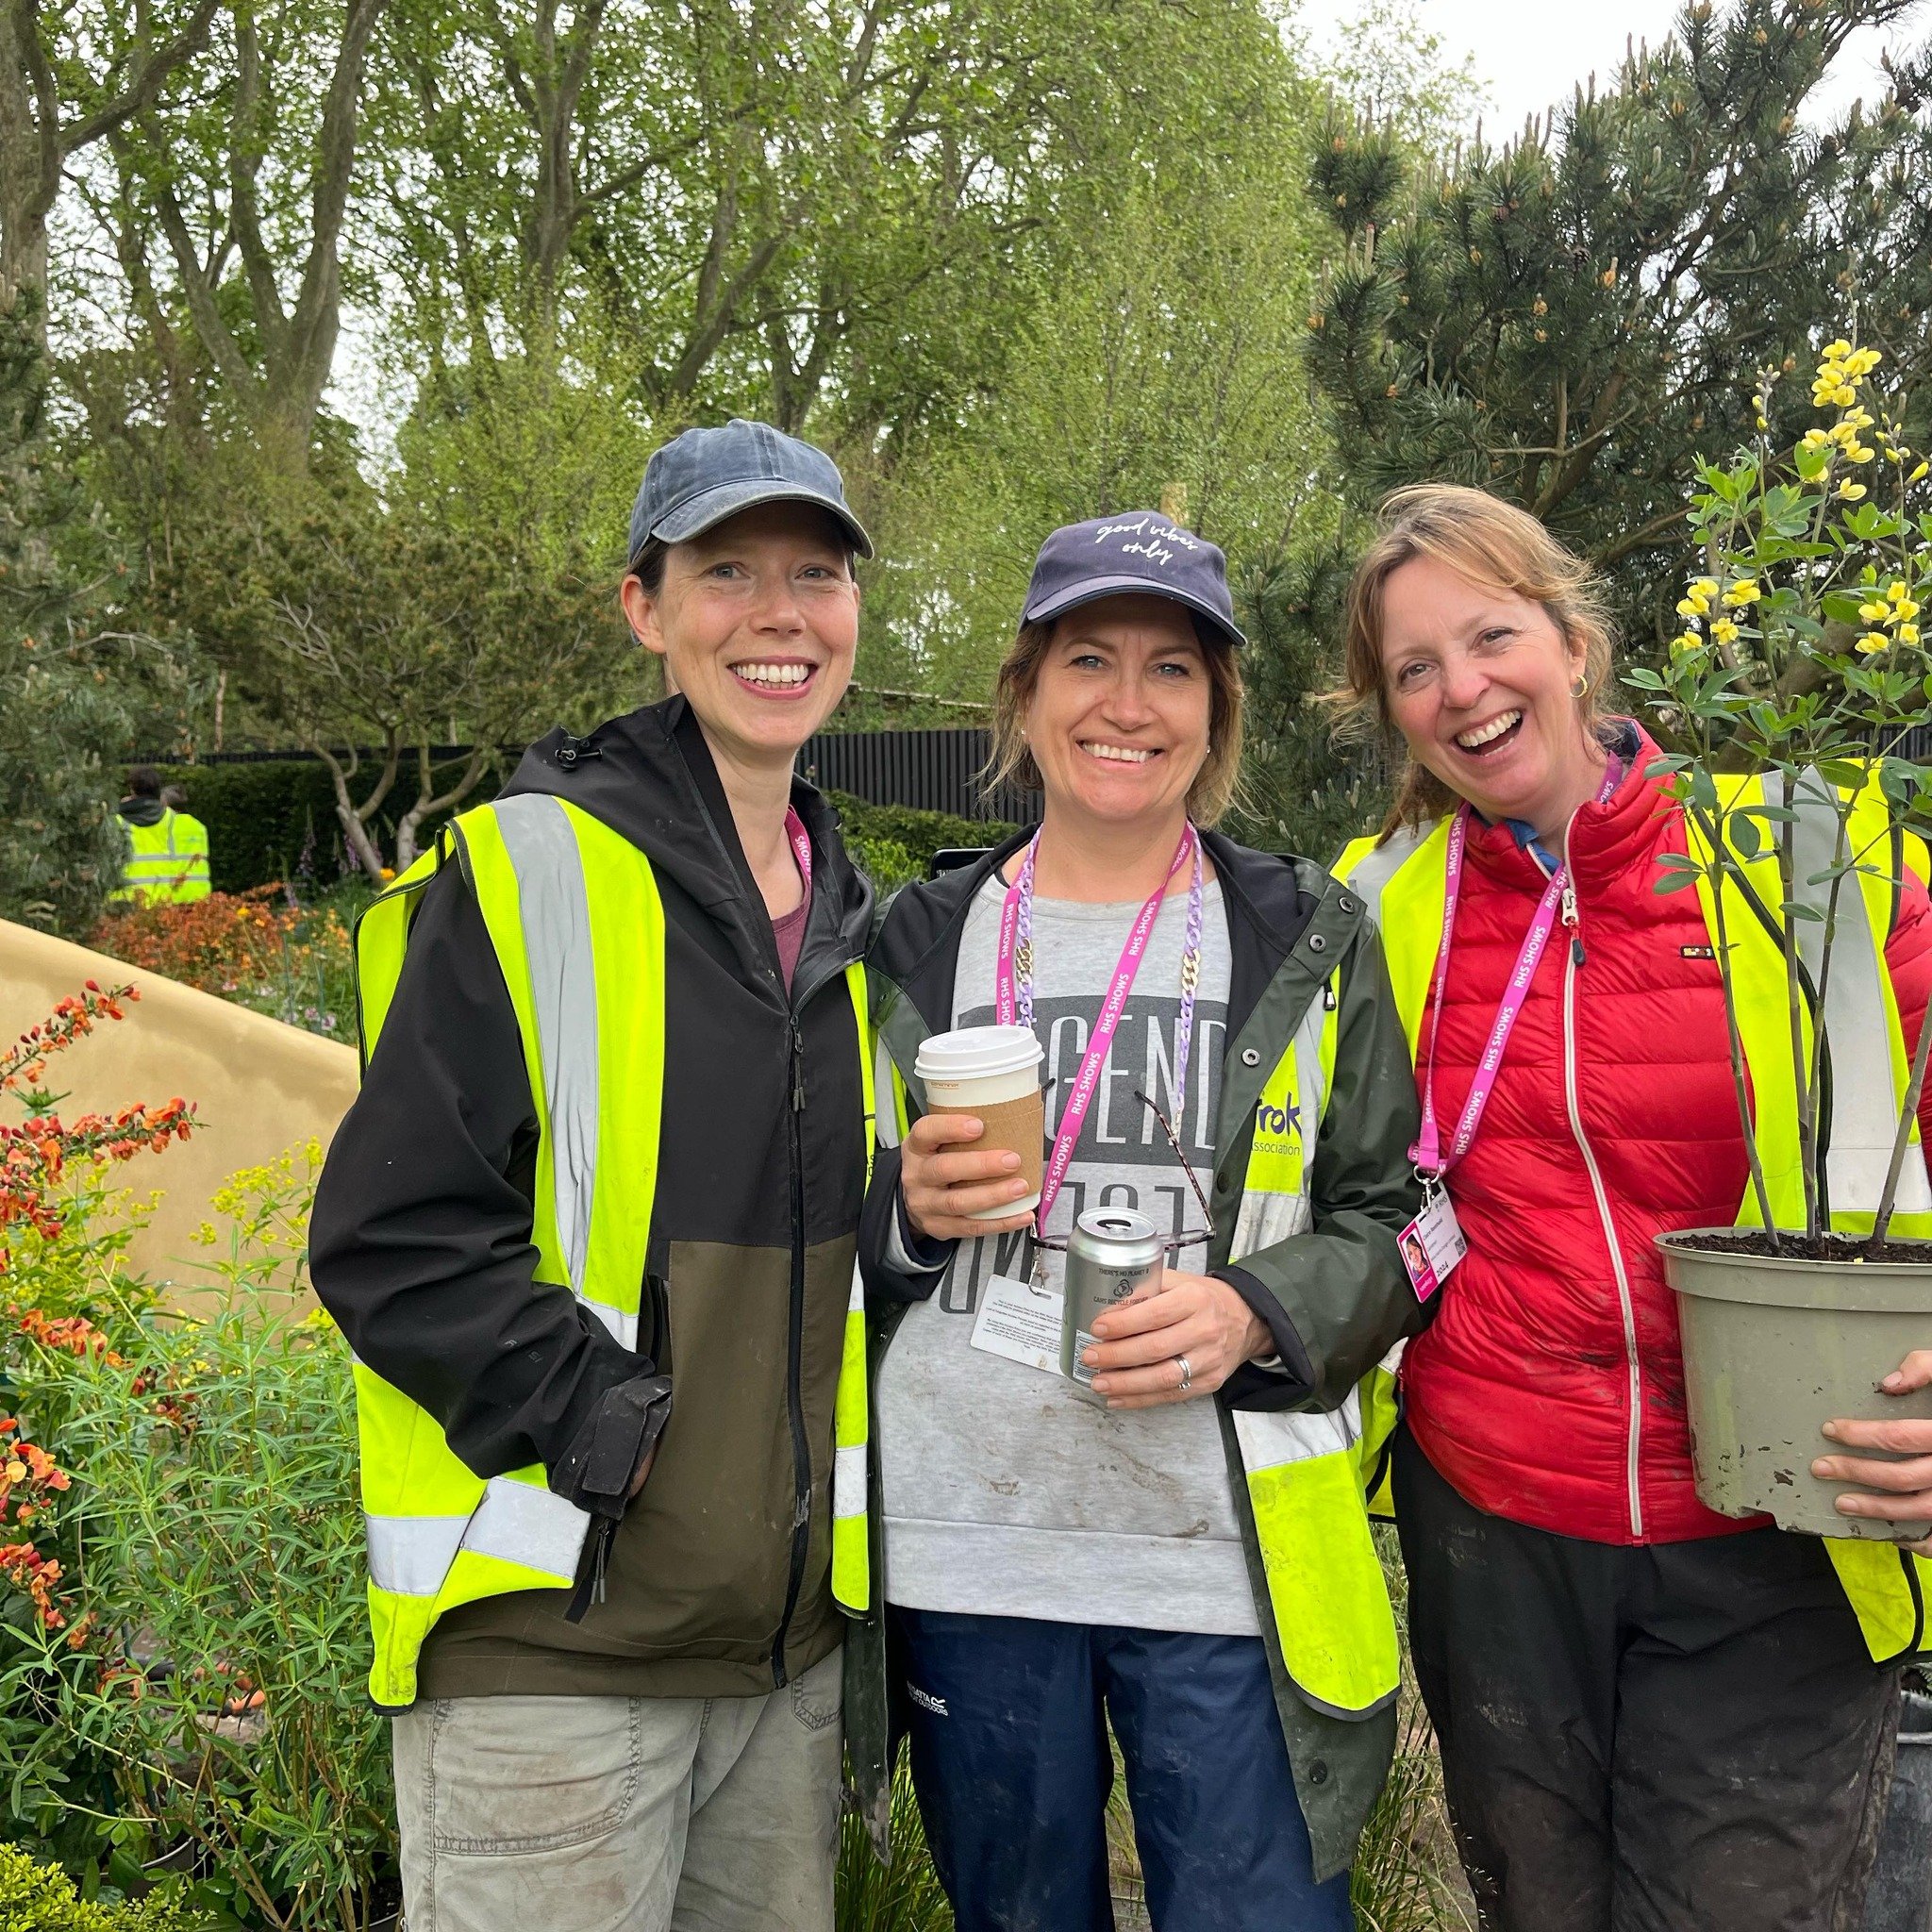 Wonderful to be part of the fab team working on @miriaharris Garden for Recovery @thestrokeassociation this week @rhschelsea with @landformuk 

Thank you for having me @miriaharris @gilliangoodson @thebush__ 💚💚💚
👏👏👏 ALL
@emilyhilliergardendesig